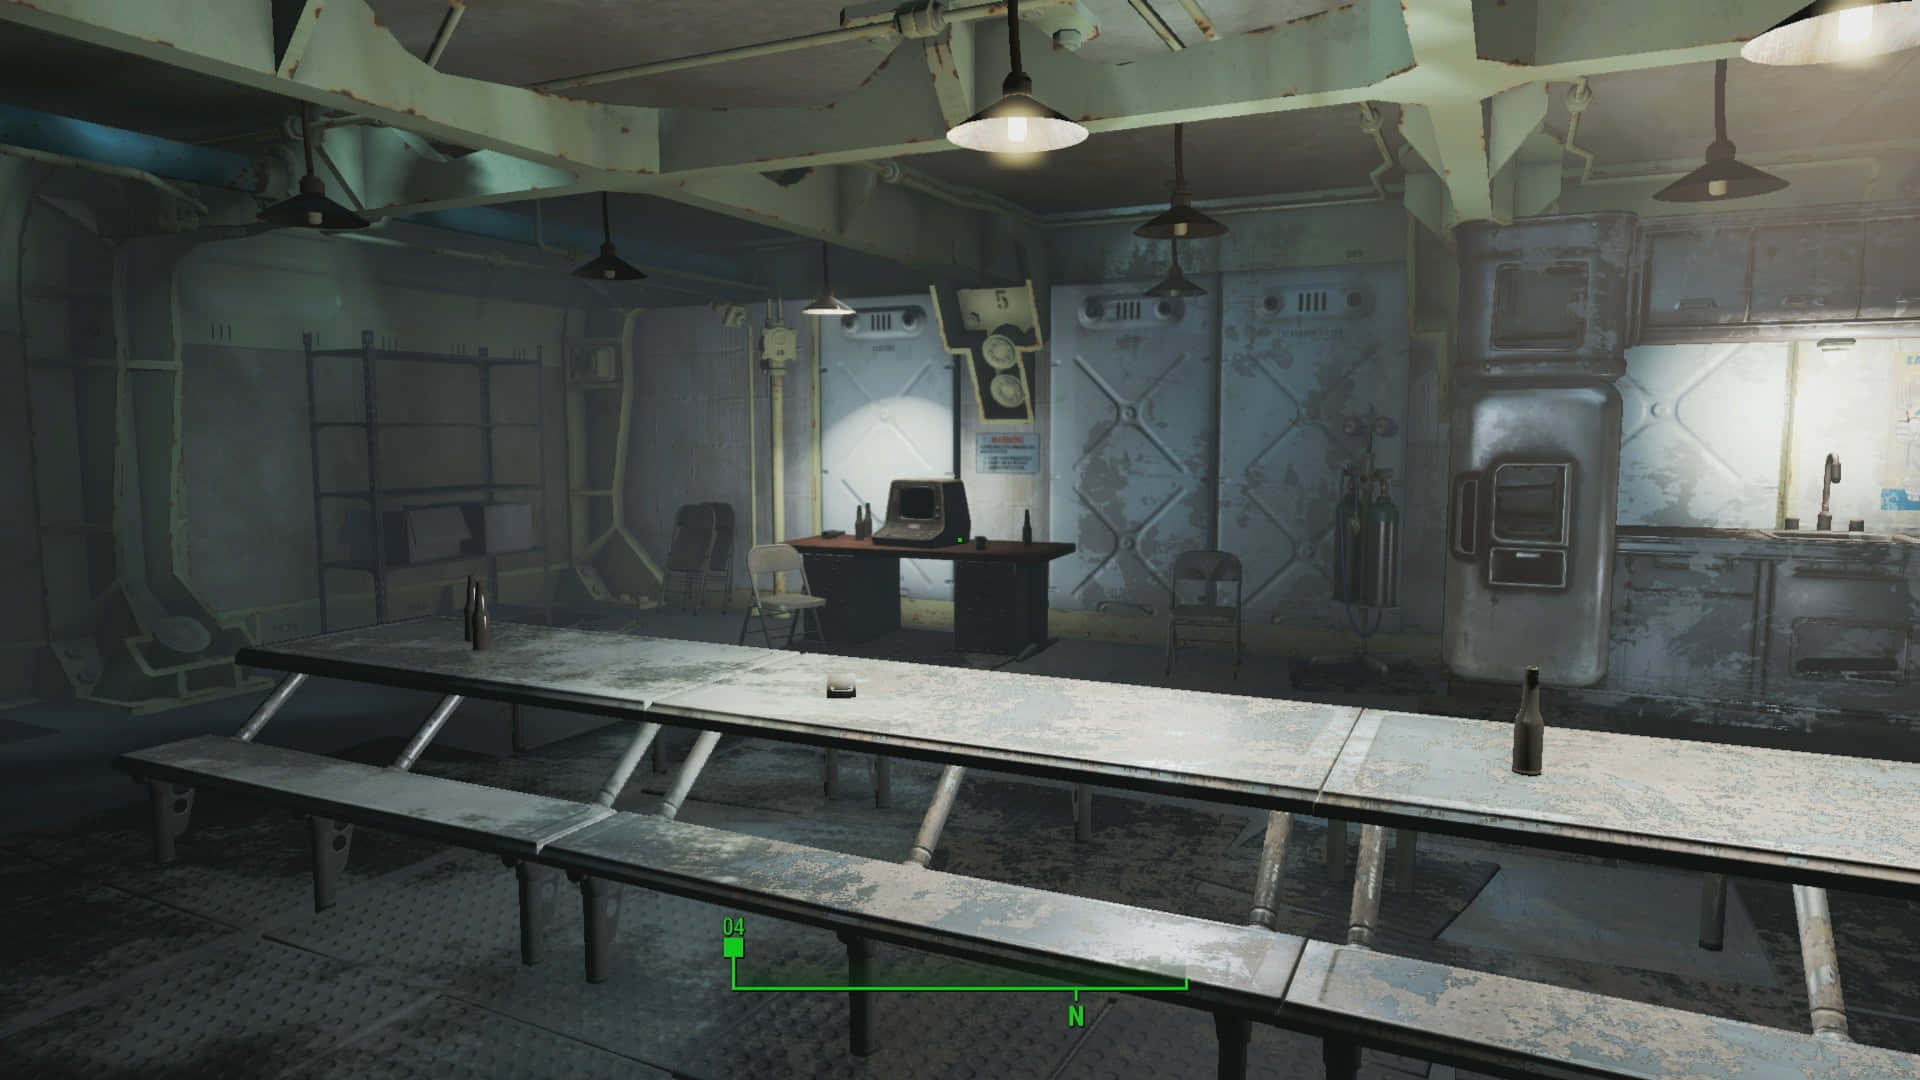 Fallout 4 Vault Interior - A Glimpse into the Wasteland Wallpaper